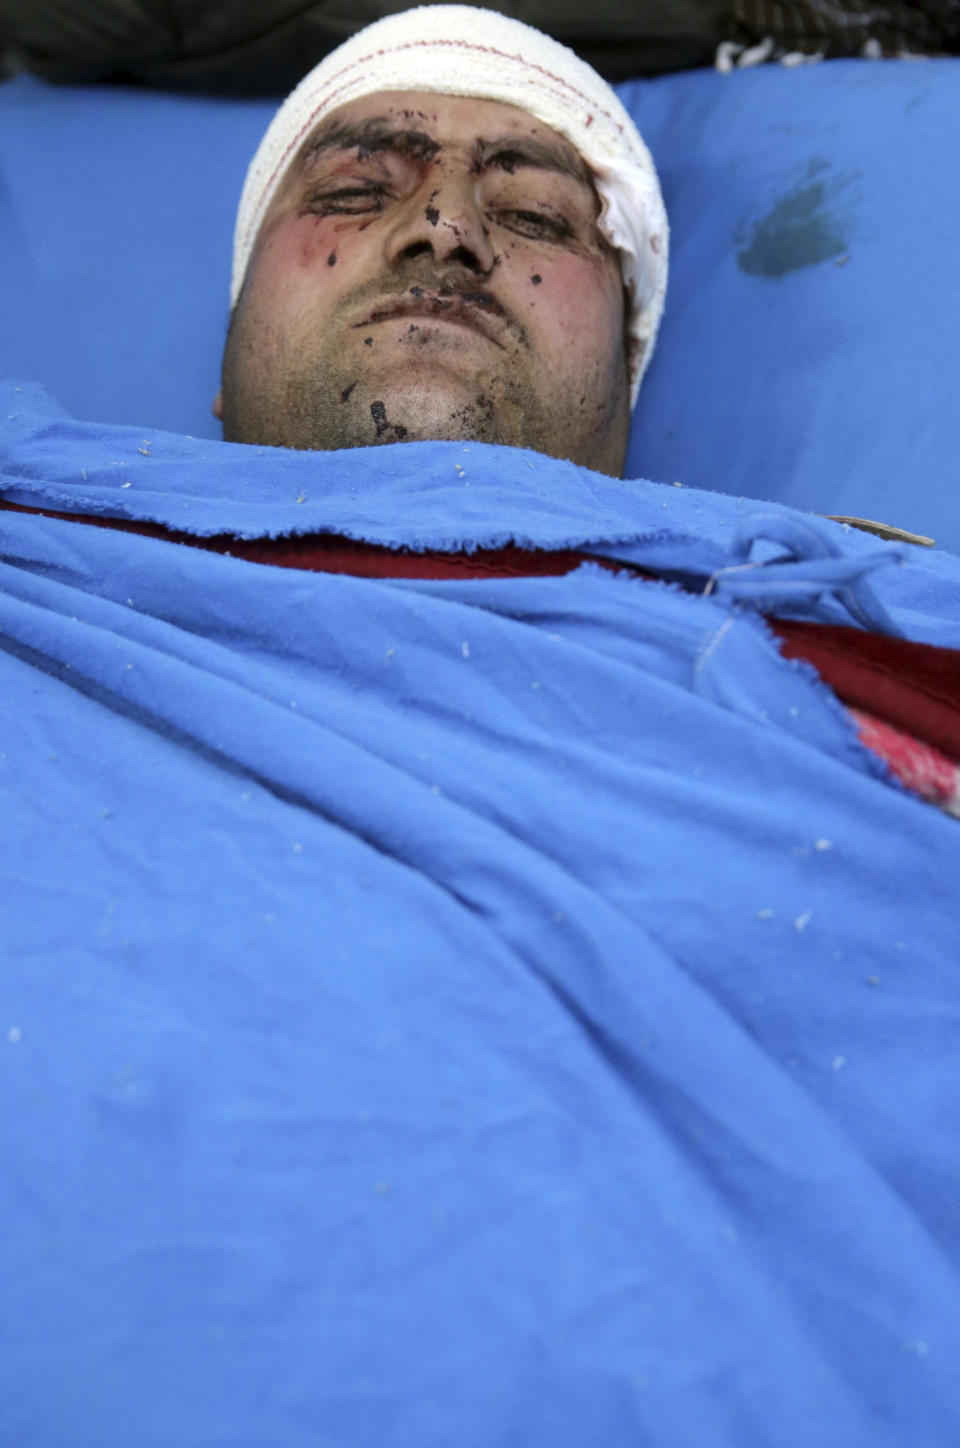 A wounded man lies on a bed in a hospital in Kabul, Afghanistan, Monday, Jan. 14, 2019. Afghan officials say multiple people were killed when a suicide bomber detonated a vehicle full of explosive in the capital Kabul on Monday. (AP Photo/Massoud Hossaini)